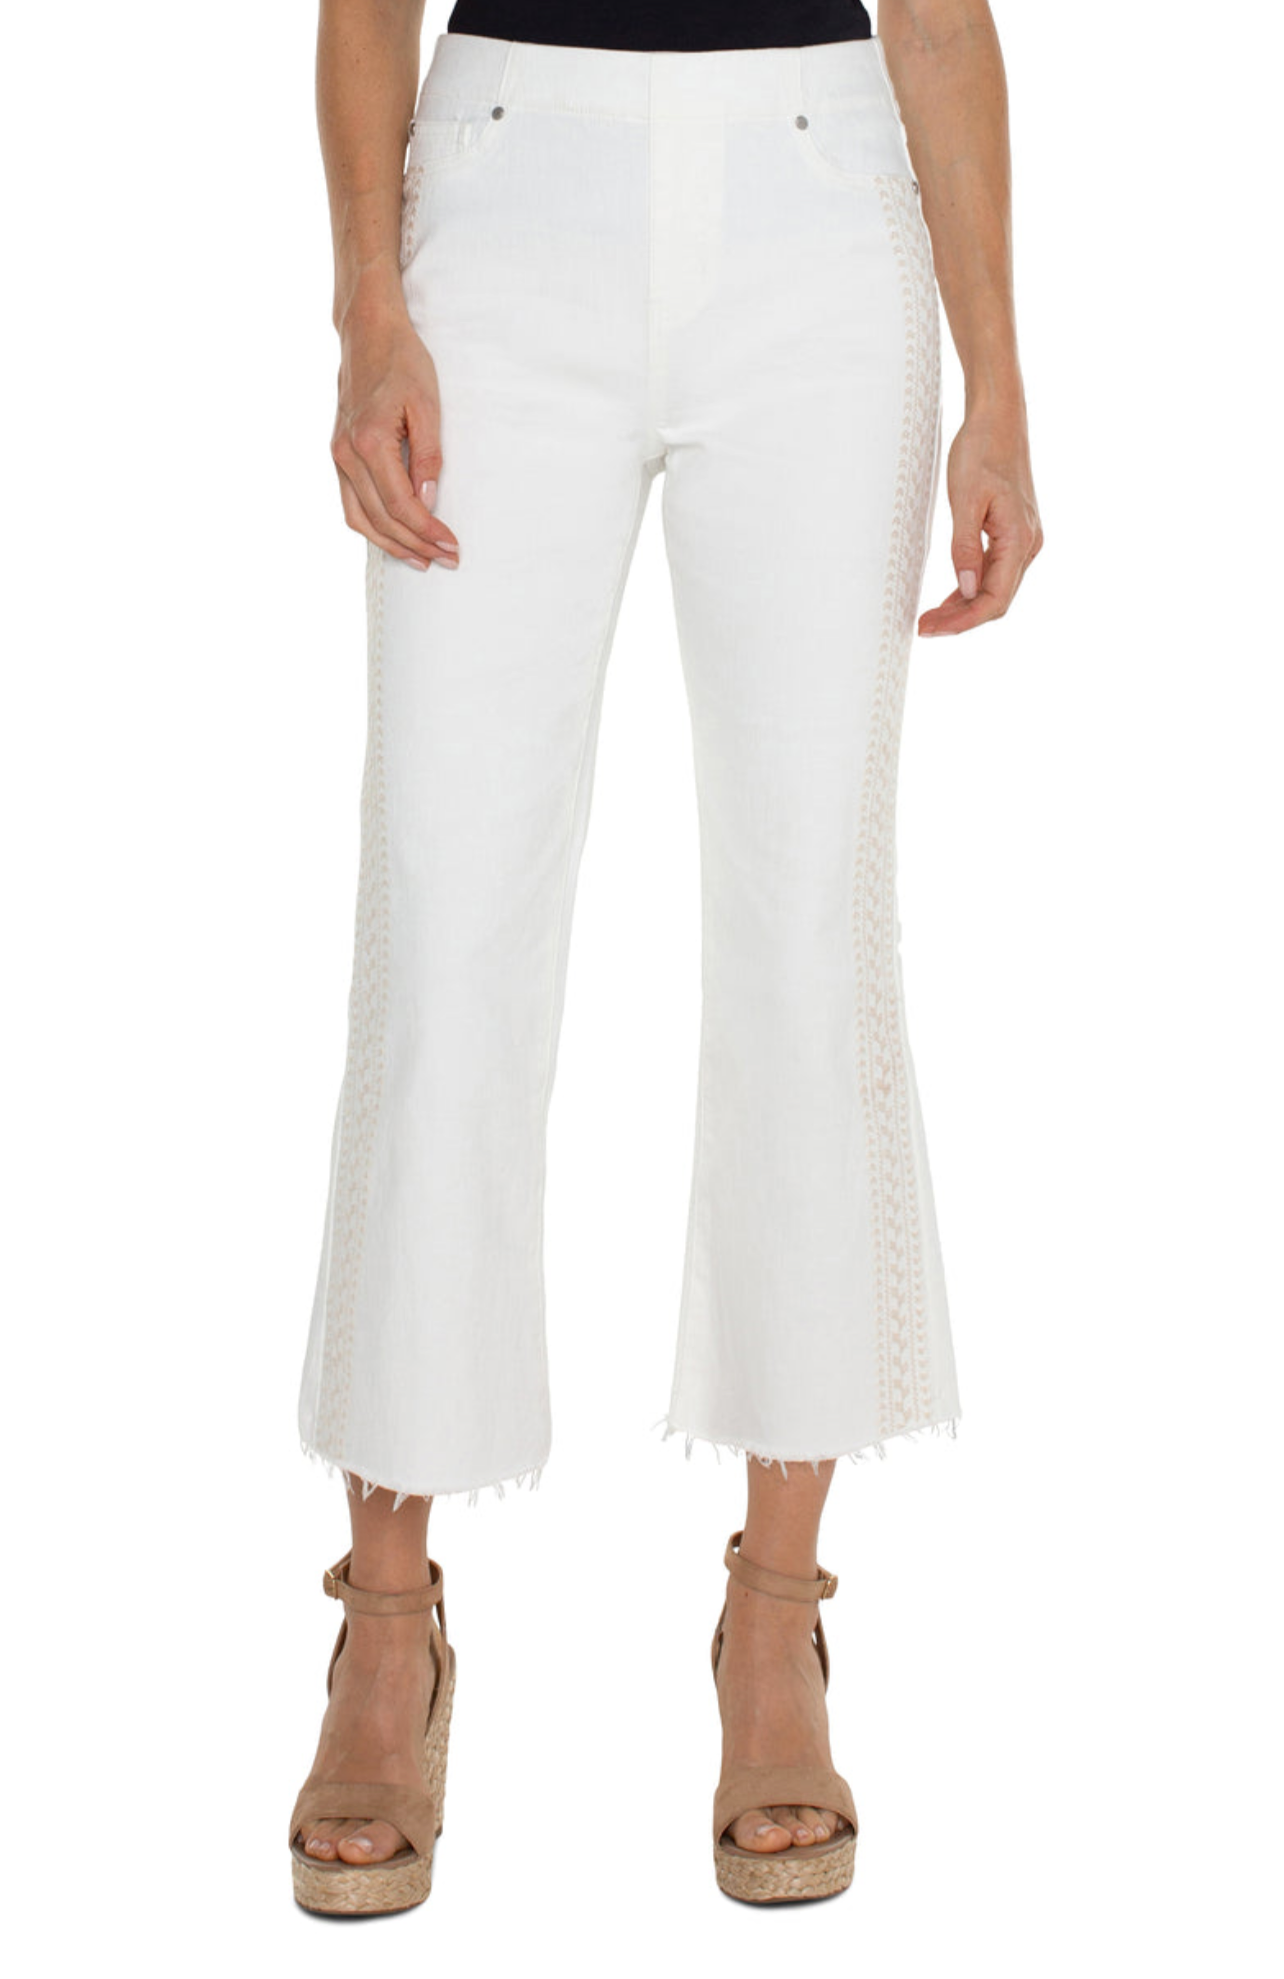 Liverpool Chloe pull on crop flare bright white